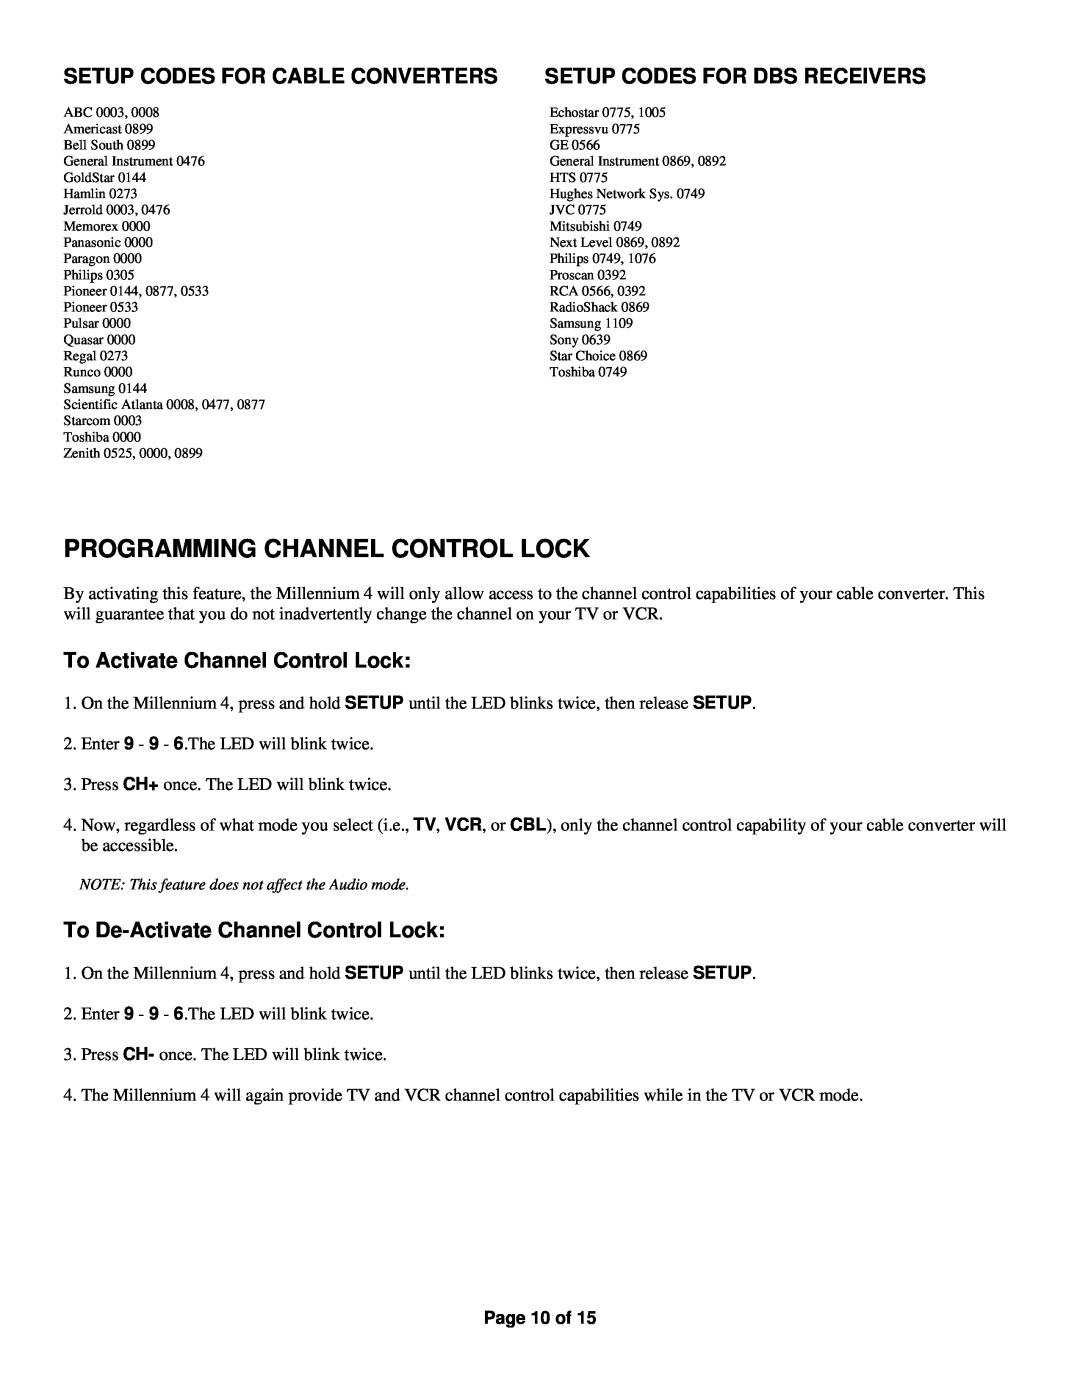 Universal Electronics Millennium 4 manual Programming Channel Control Lock, Setup Codes For Cable Converters, Page 10 of 